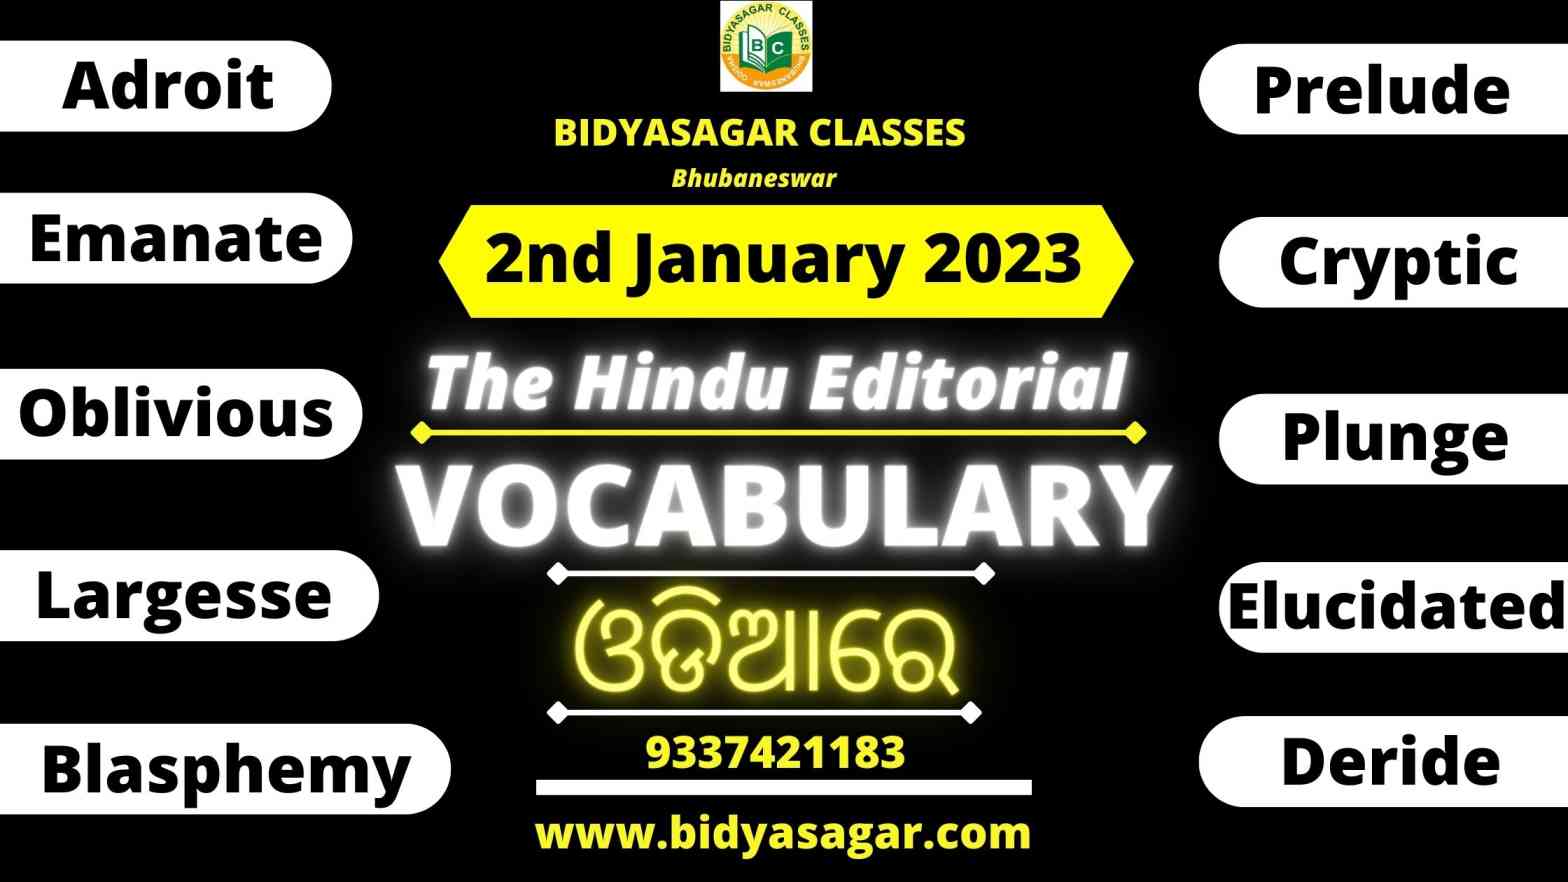 The Hindu Editorial Vocabulary of 2nd January 2023